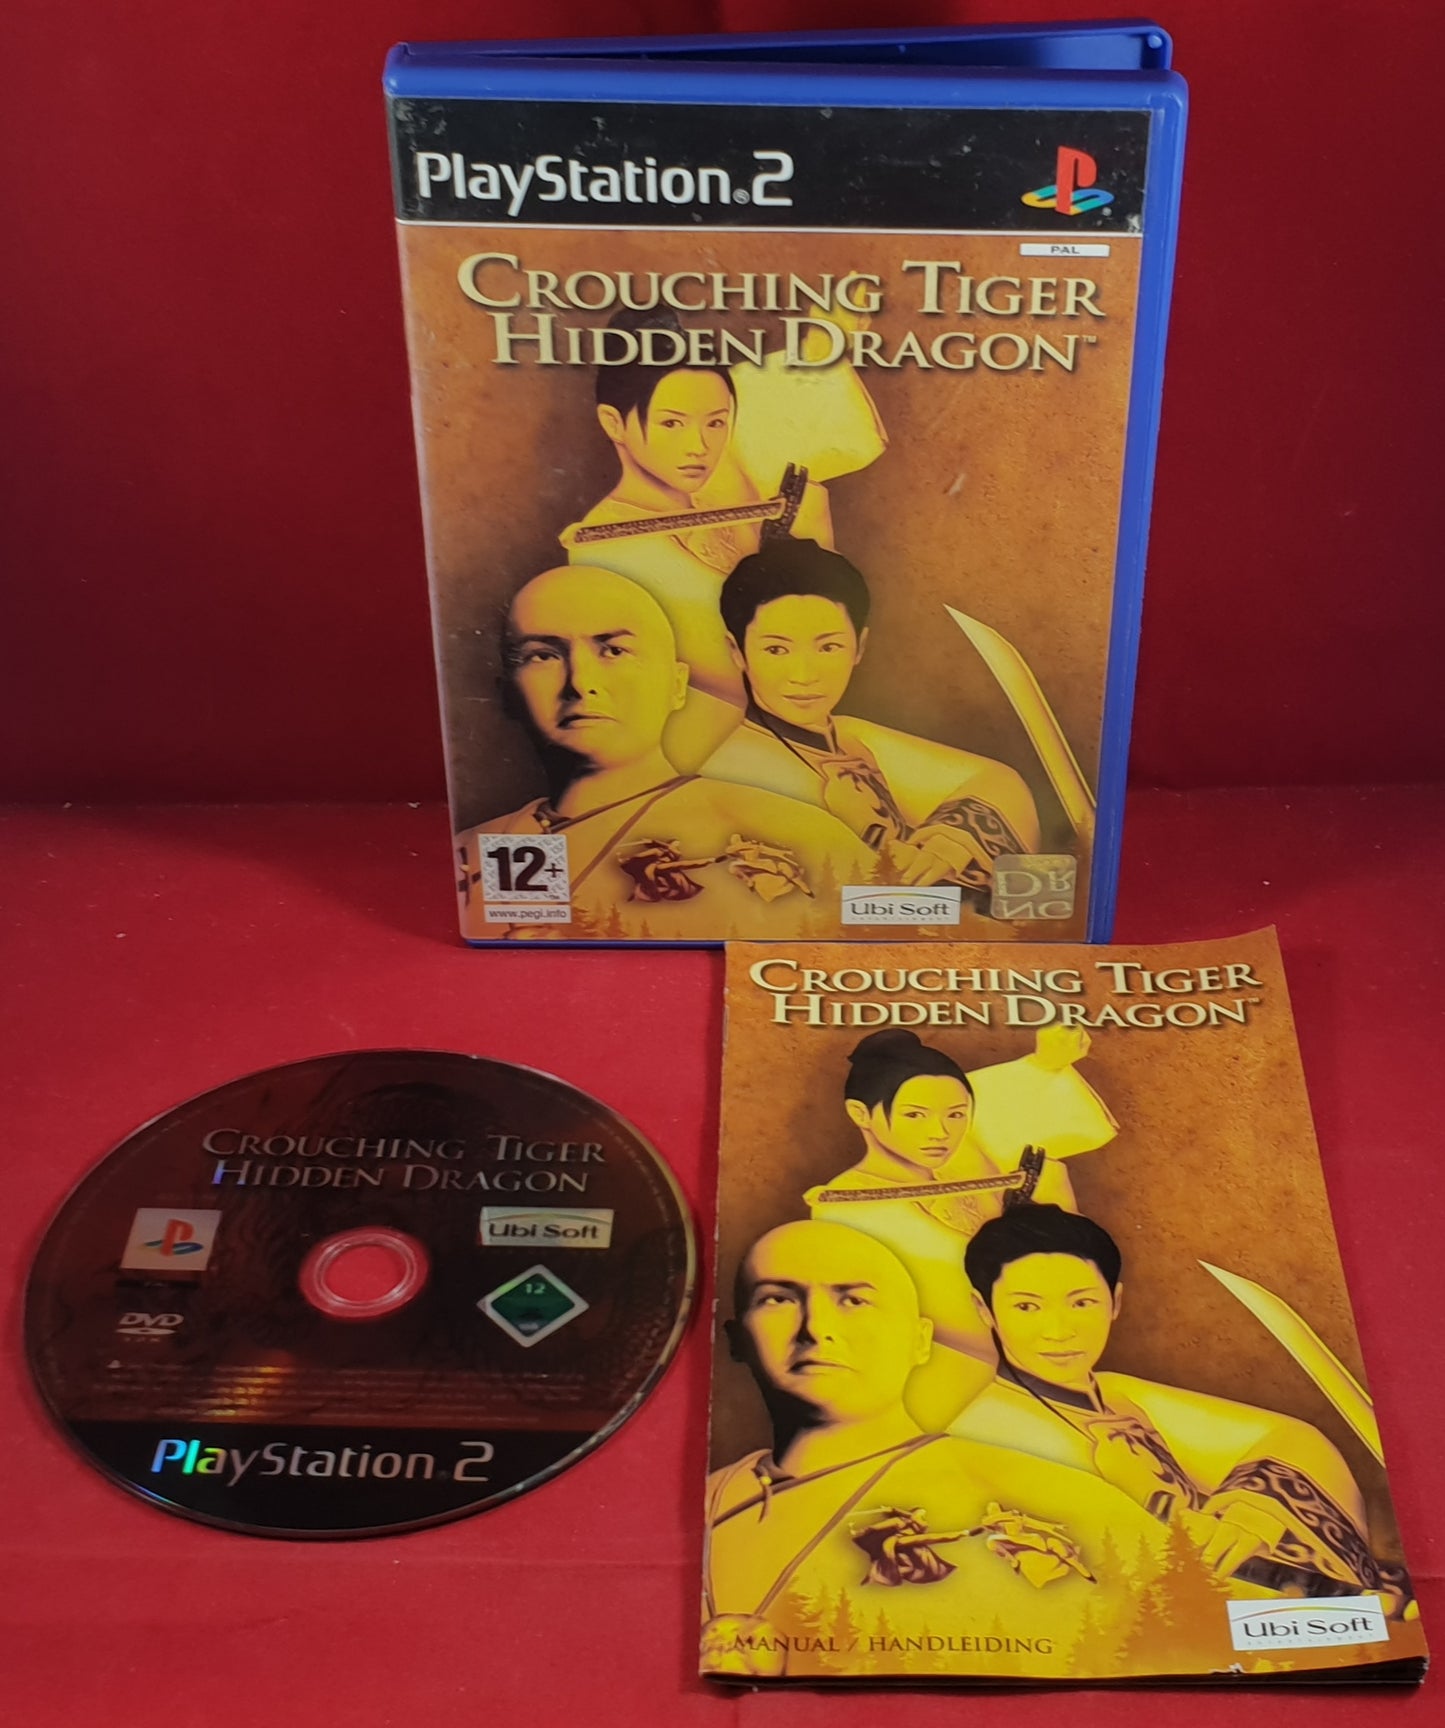 Crouching Tiger Hidden Dragon Sony Playstation 2 (PS2) Game